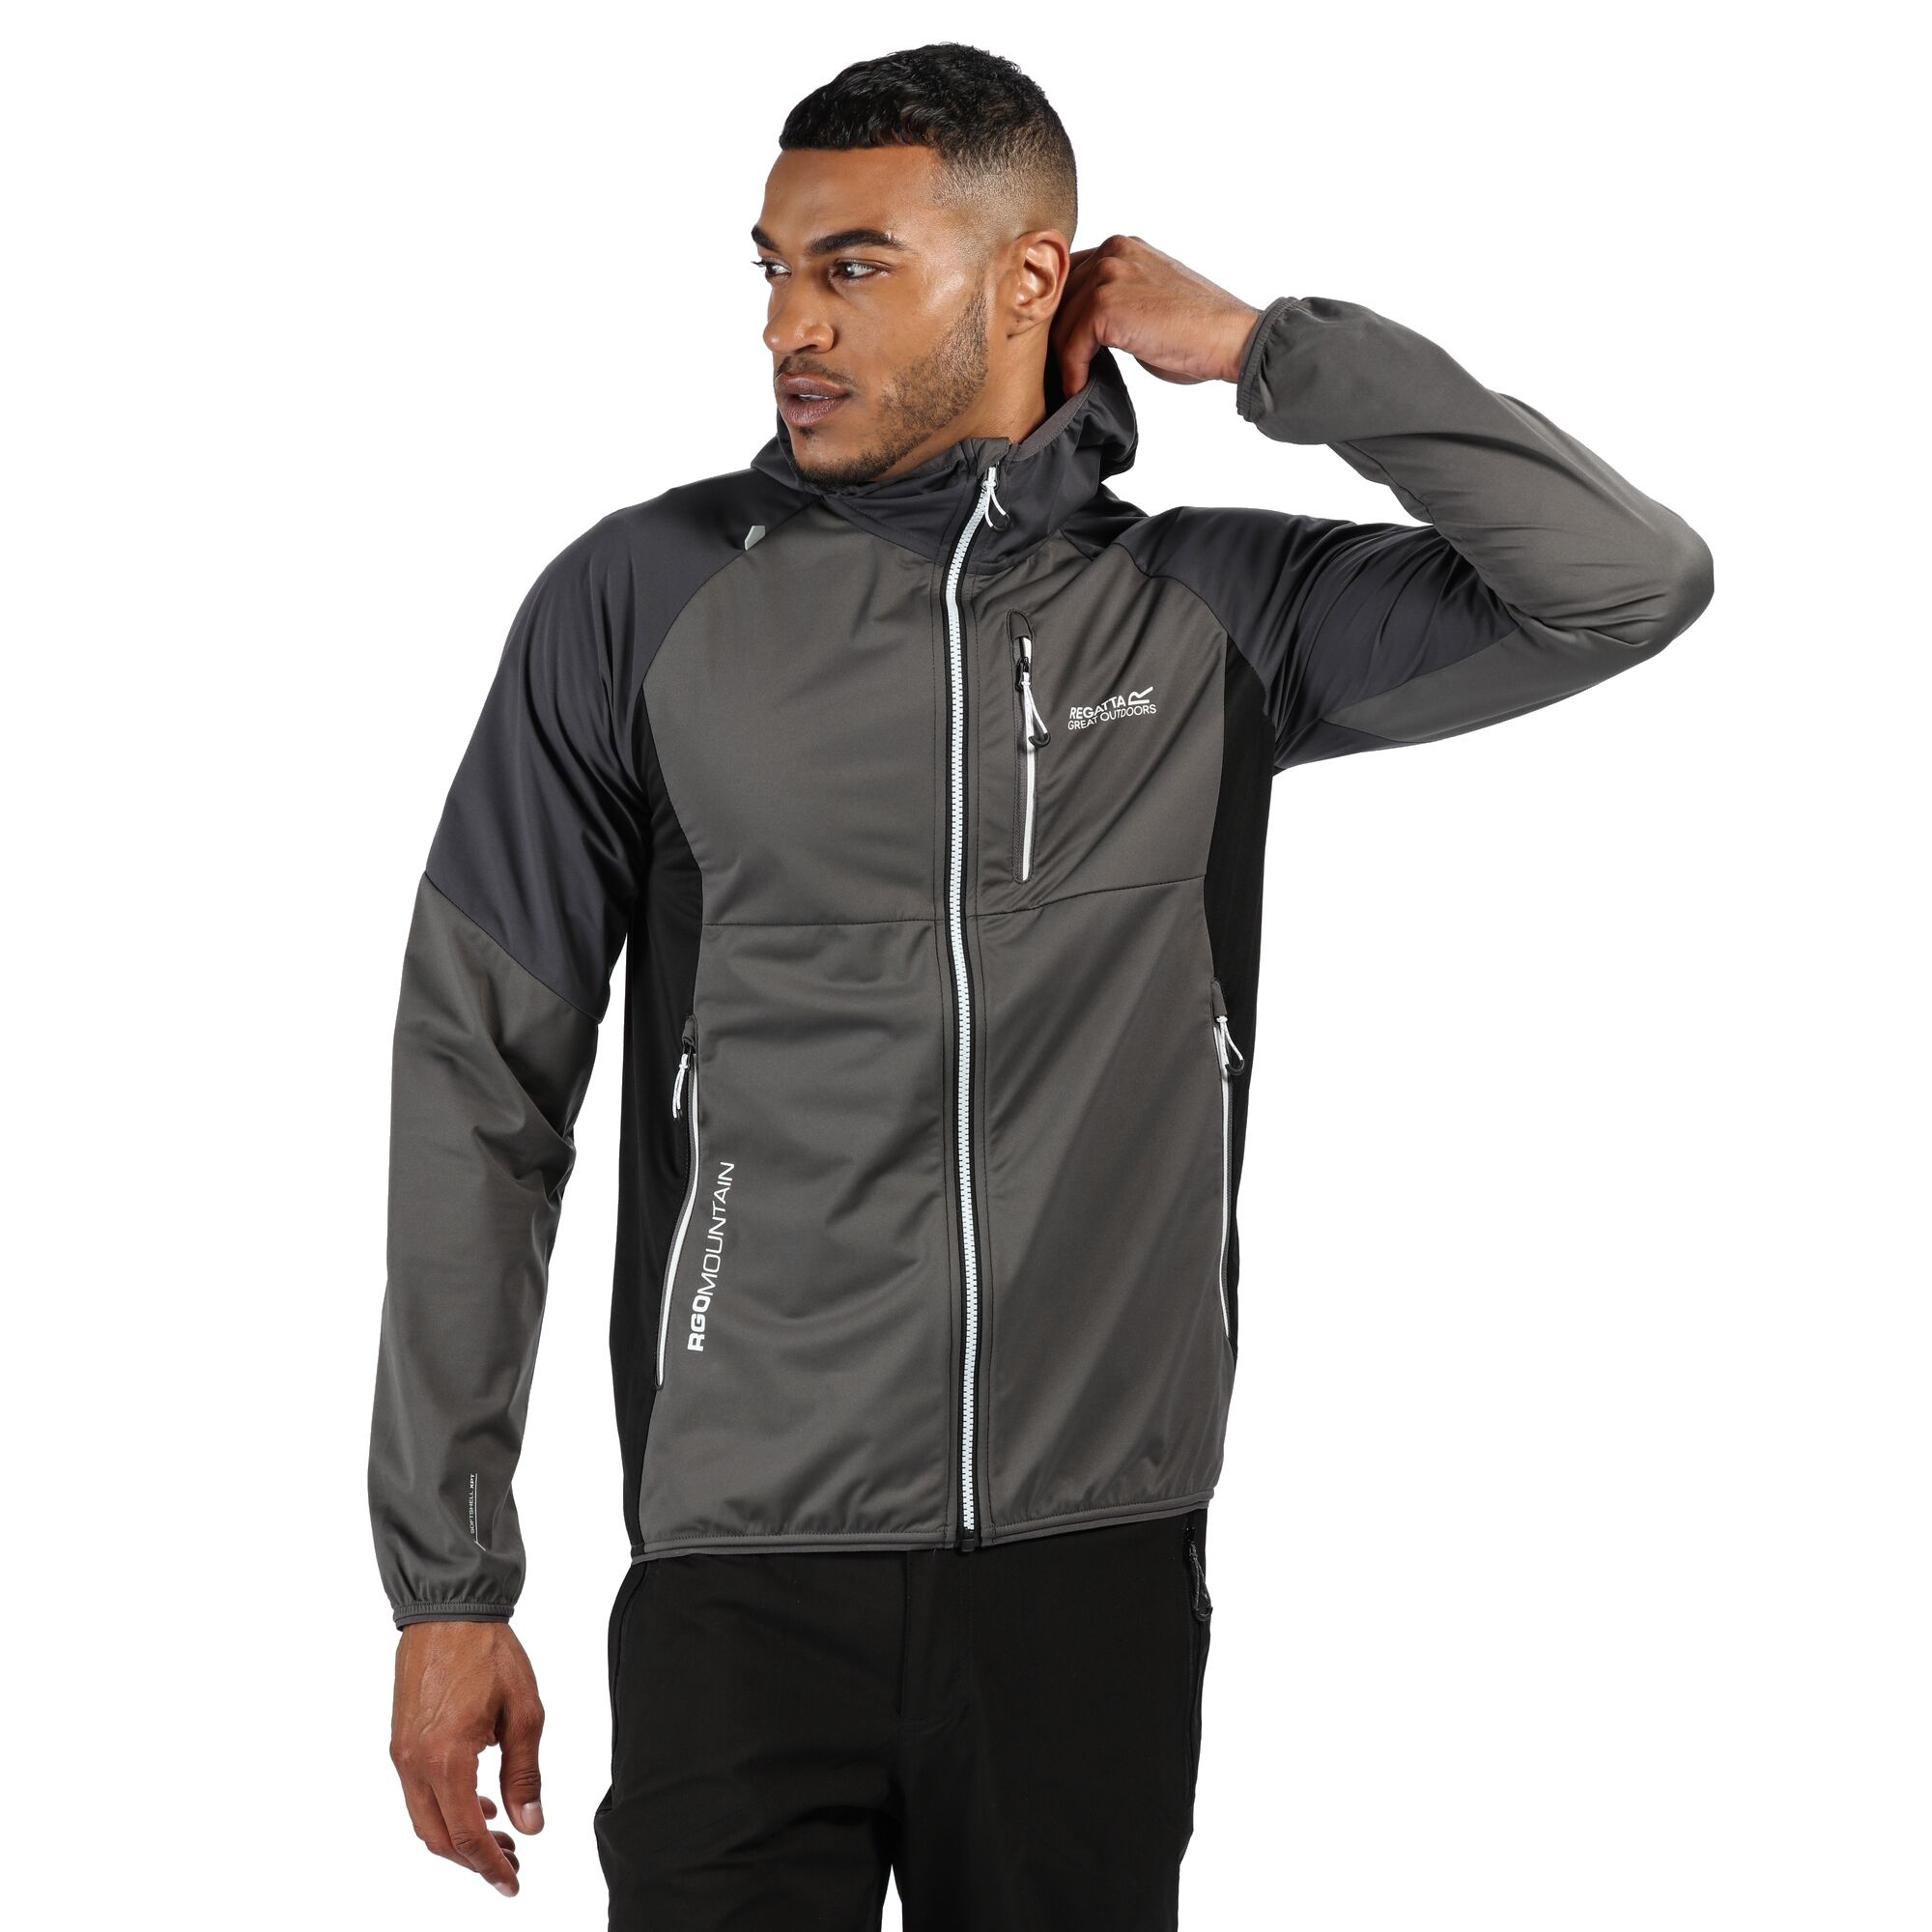 Material: 100% polyester. Lightweight Softshell XPT stretch fabric. Breathability rating 10,000g/m2/24hrs. Waterproof and windproof membrane fabric. Durable water repellent finish. Grown on hood with rear adjuster. Inner zip guard. Articulated sleeves for enhanced range of movement. 2 zipped lower pockets and 1 zipped chest pocket. Mesh lined pockets for breathability. Stretch binding to hood opening, cuffs and hem.